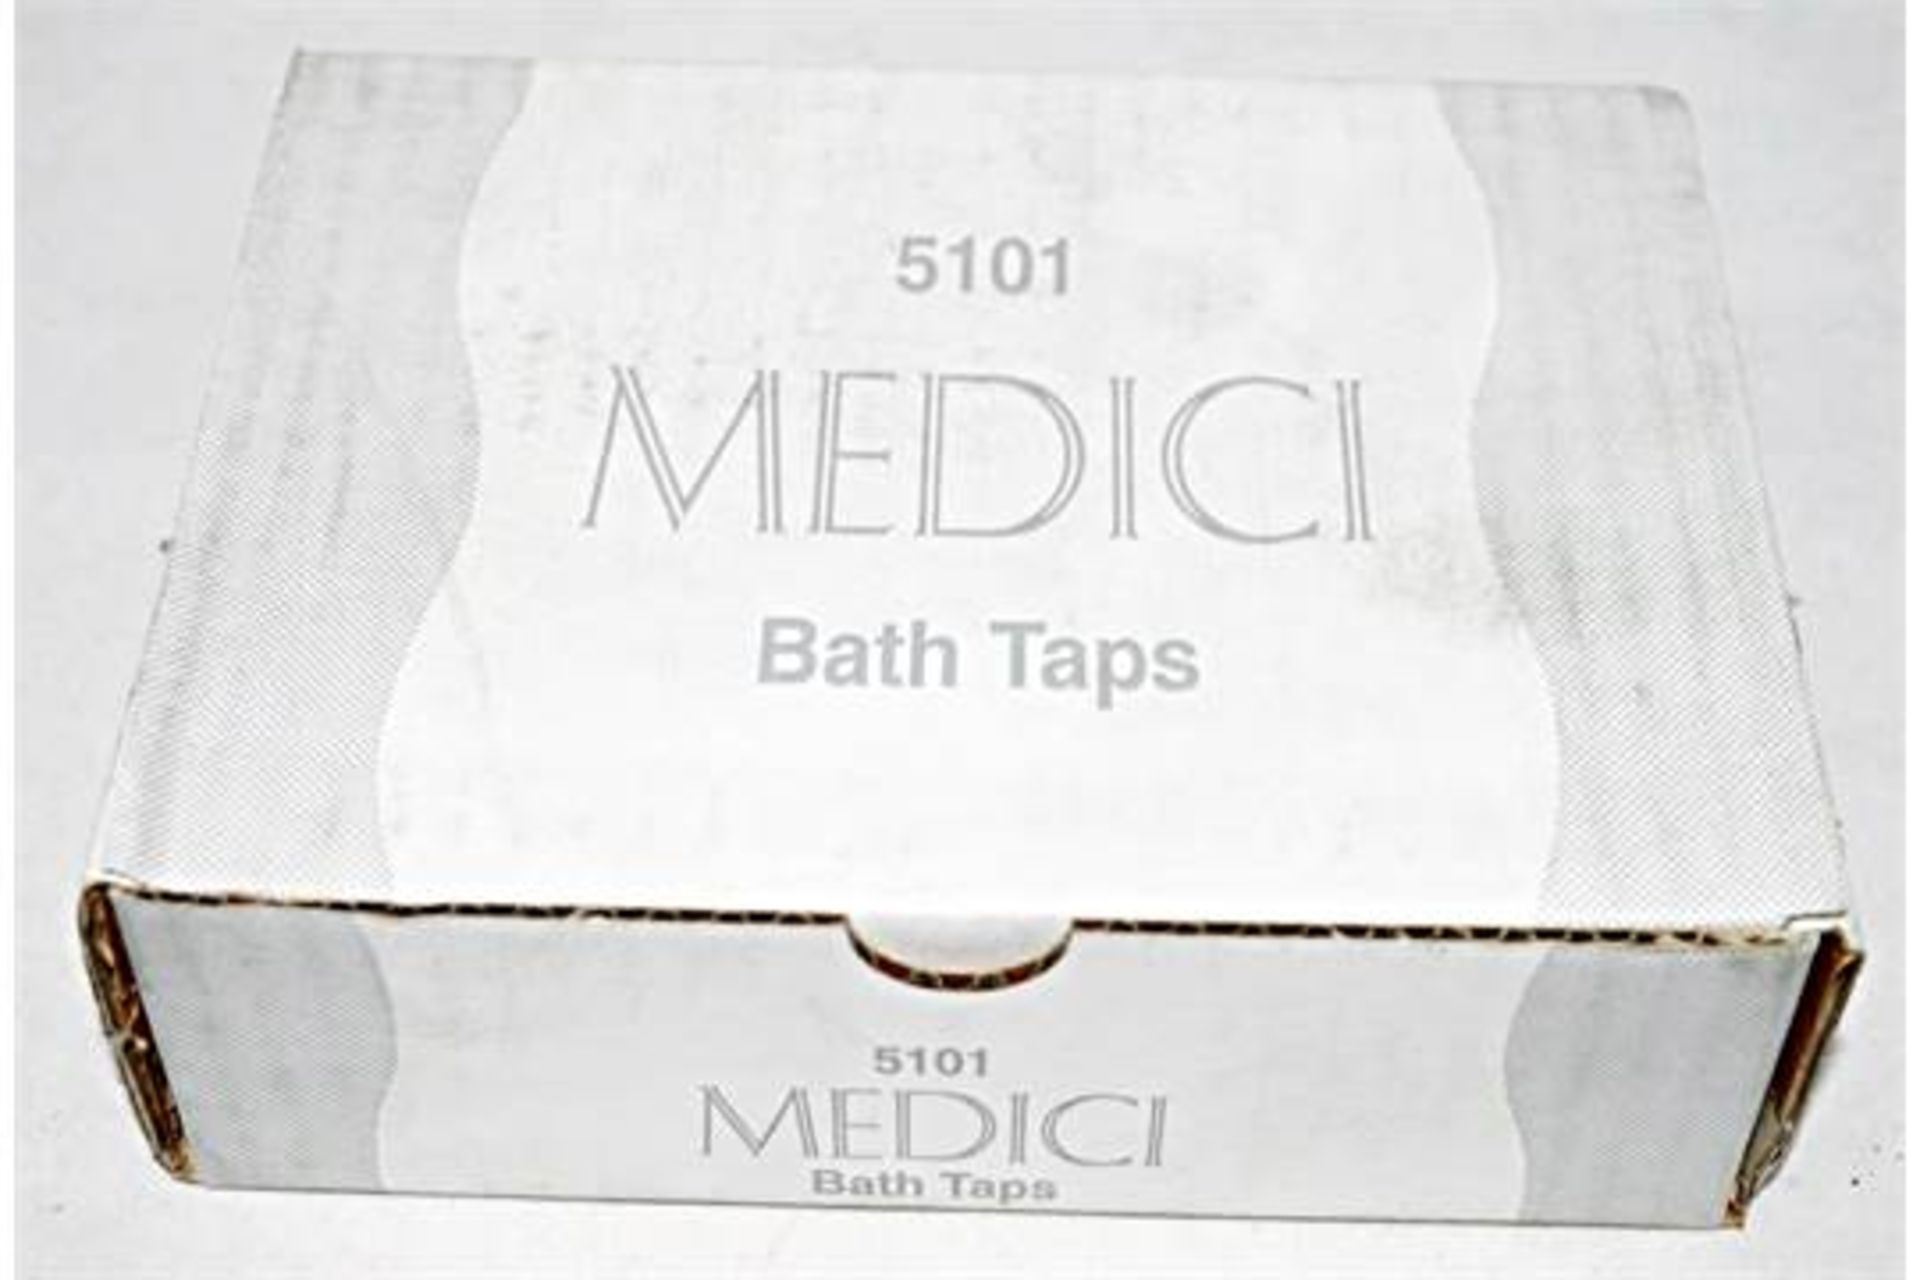 12 x Sets of Medici Bath Taps in Chrome - Shire Bathrooms - Without Tap Heads - New Boxed Stock - - Image 4 of 4